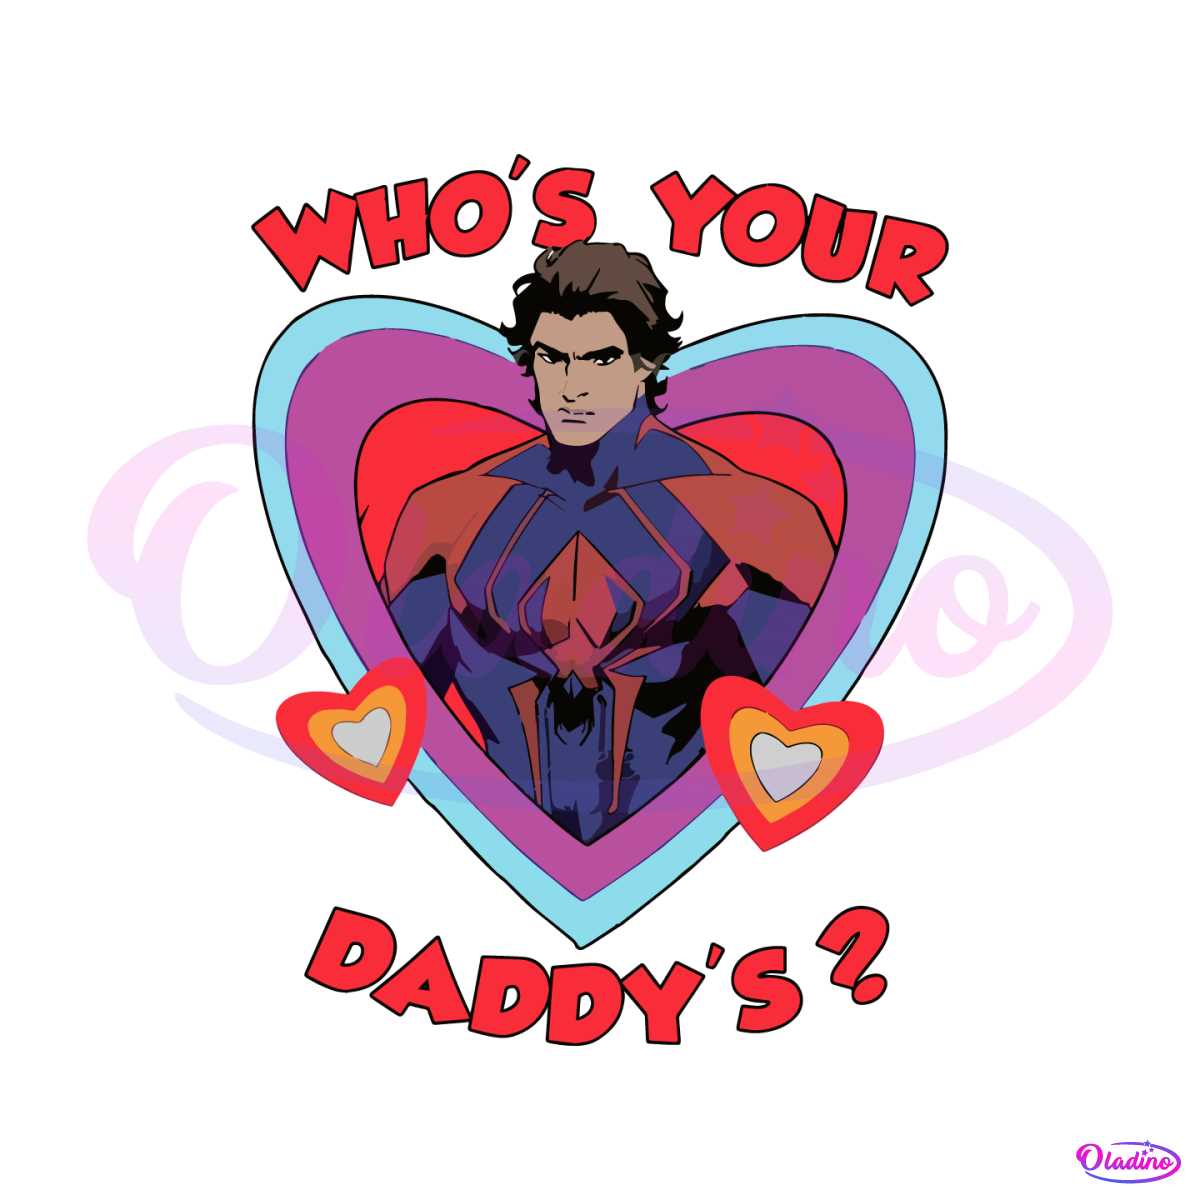 spiderman-miguel-ohara-whos-your-daddy-svg-cutting-file